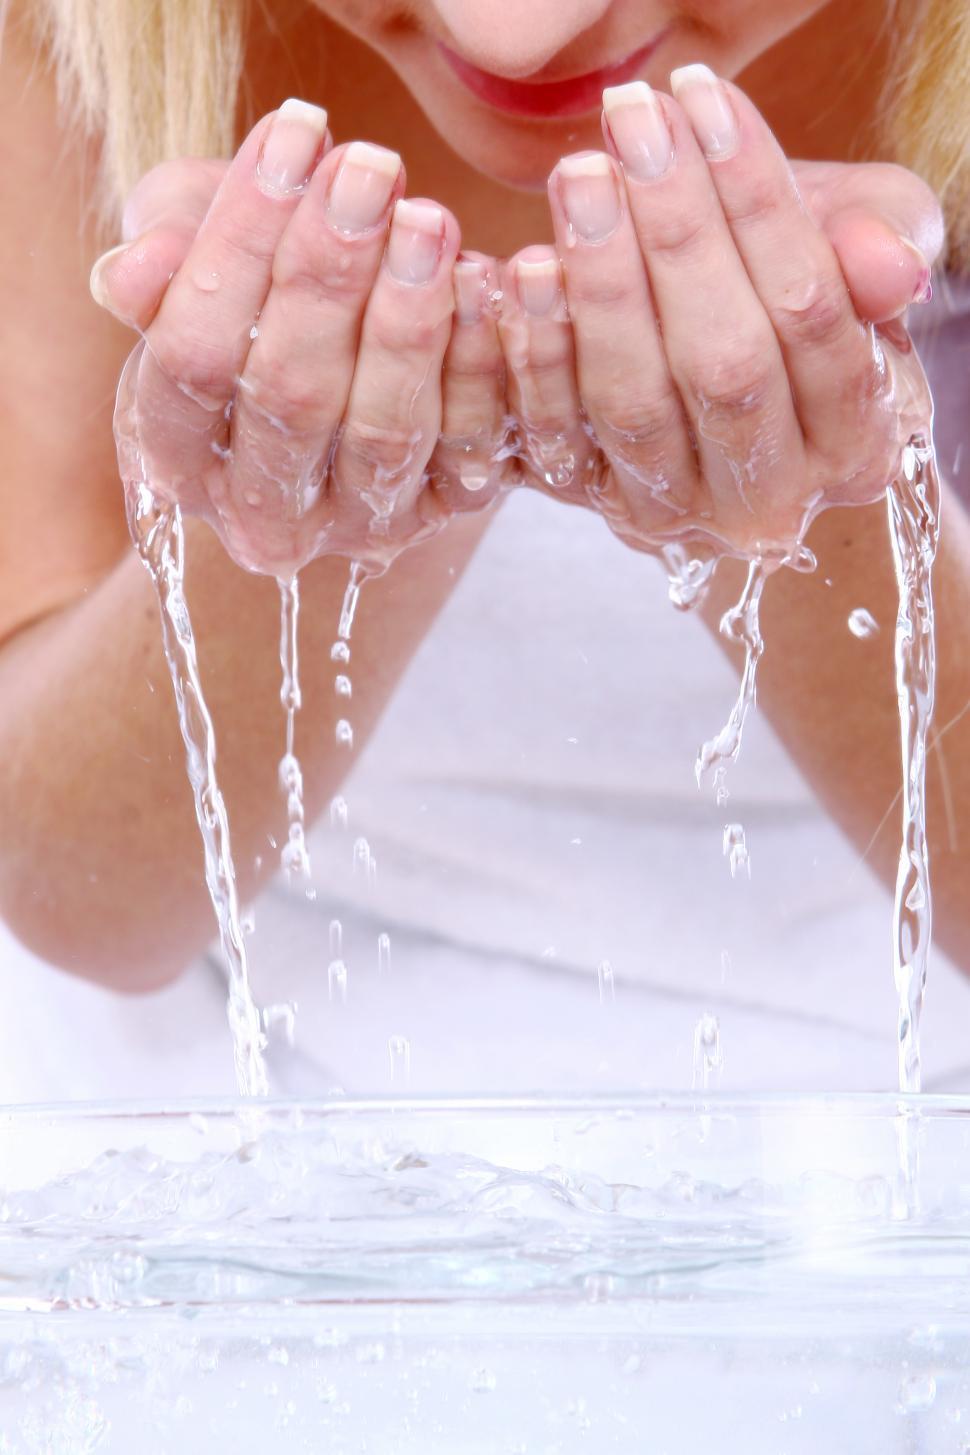 Free Image of Washing face with water in hands 